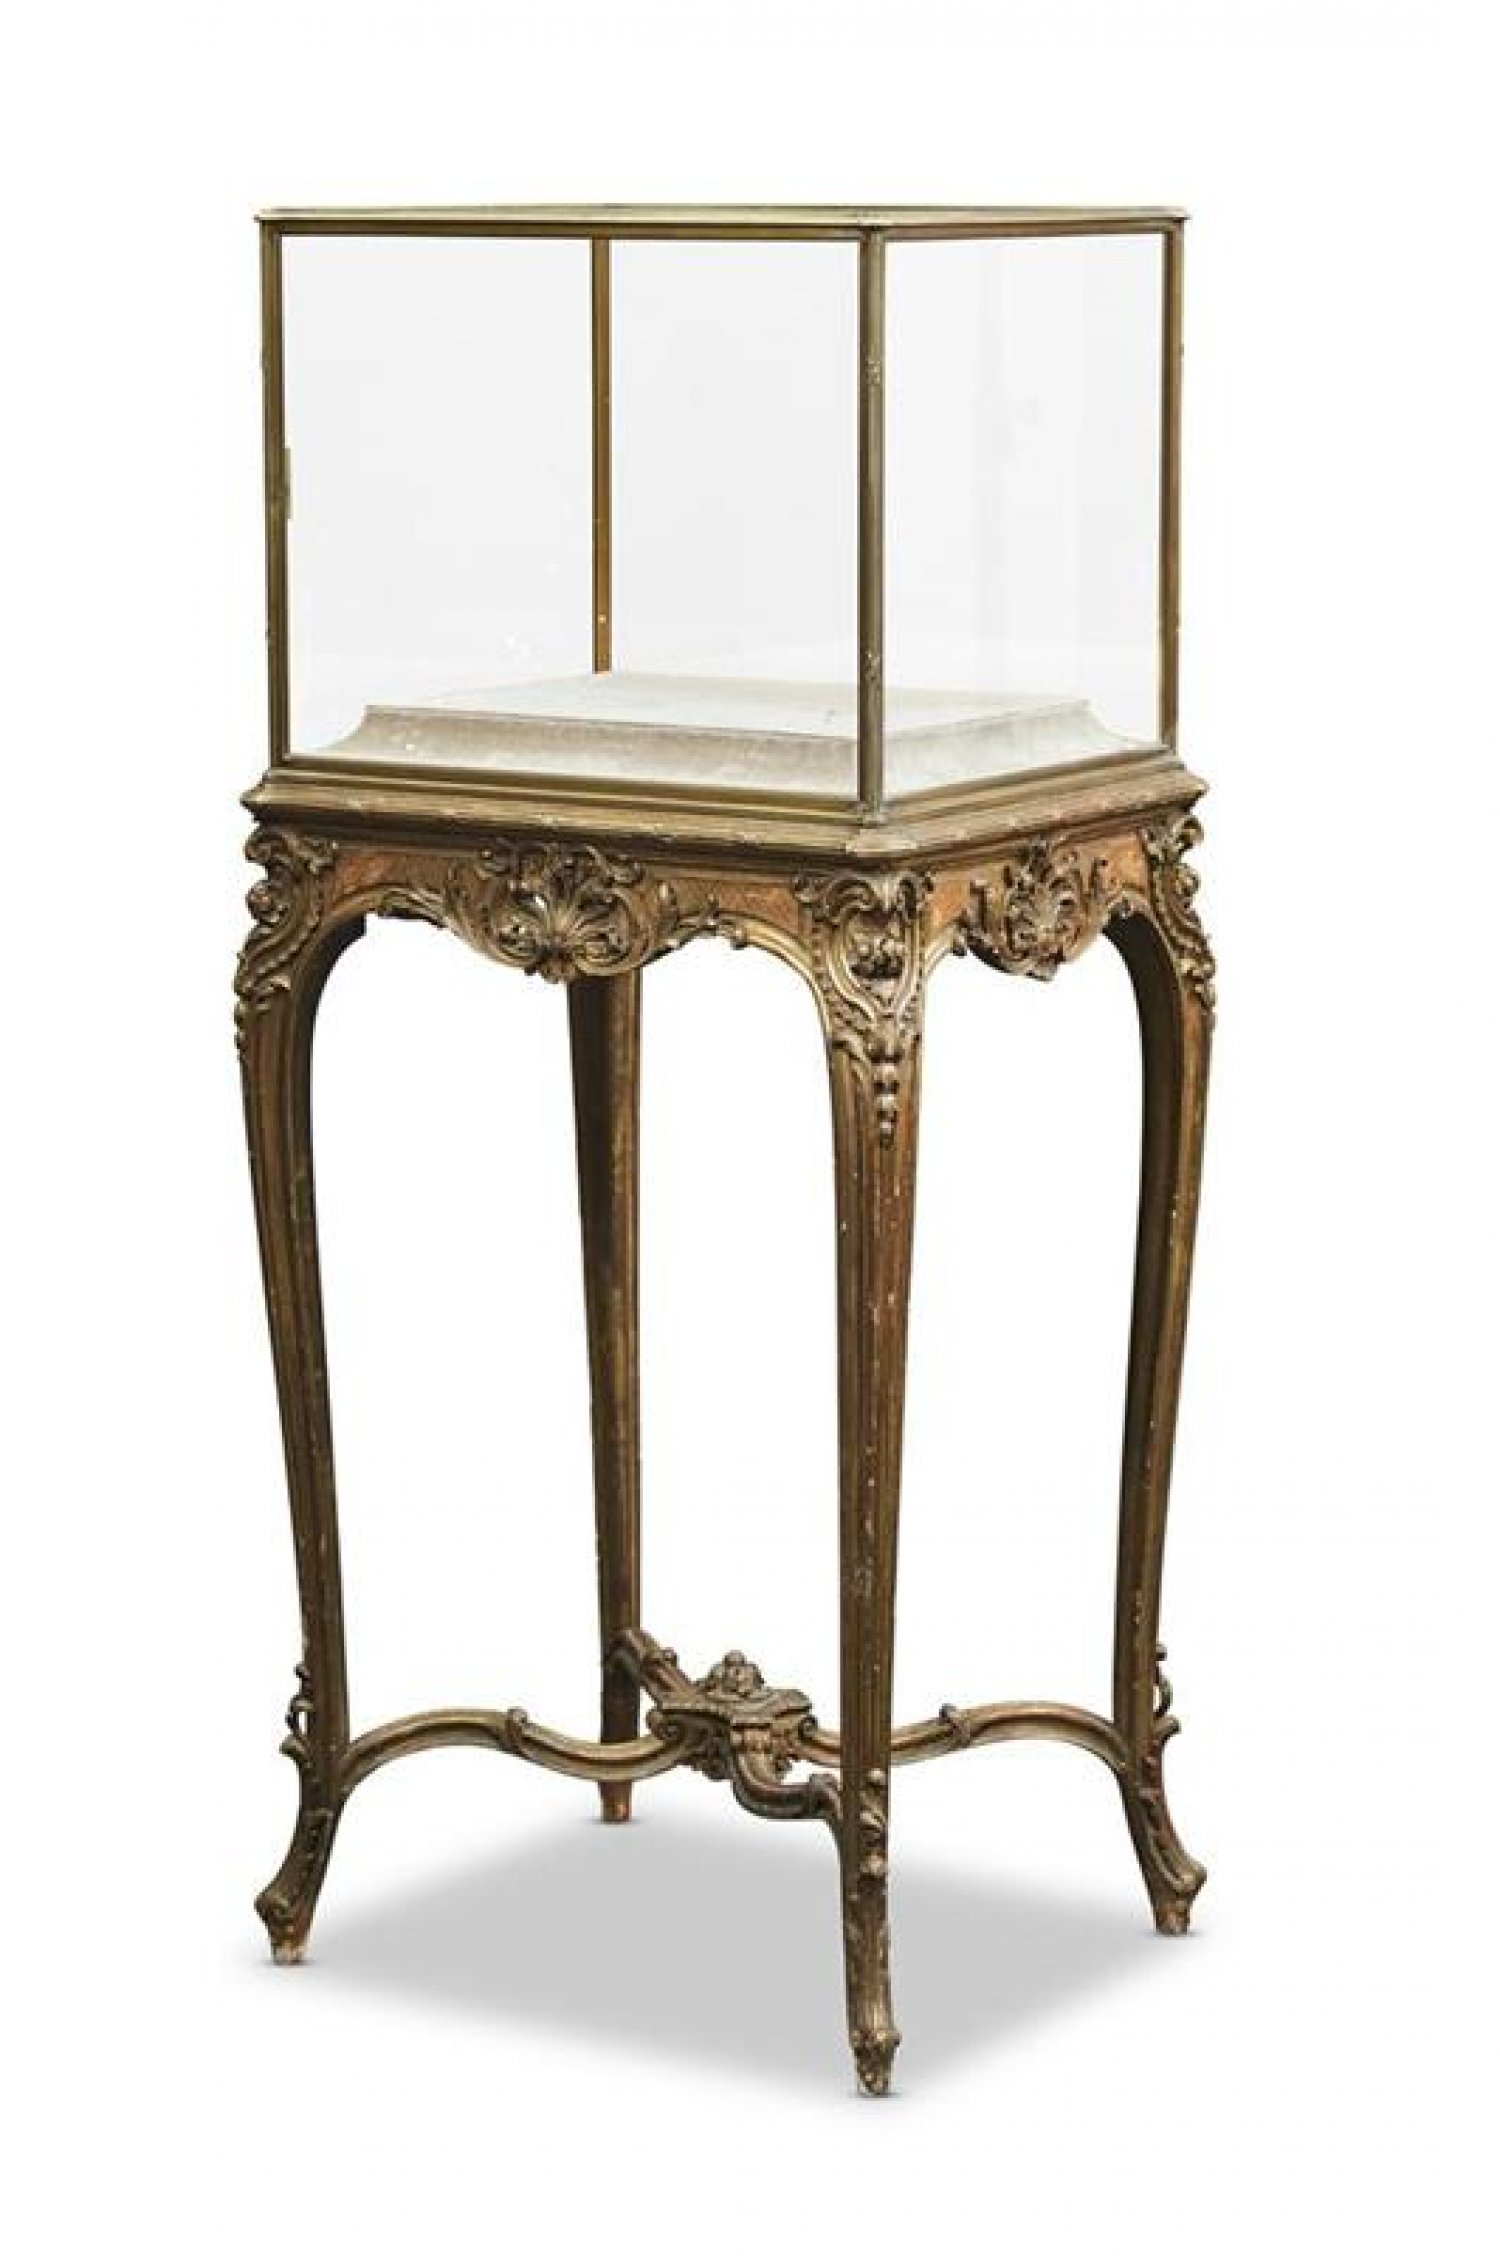  French Louis xv Style Vitrine on Stand